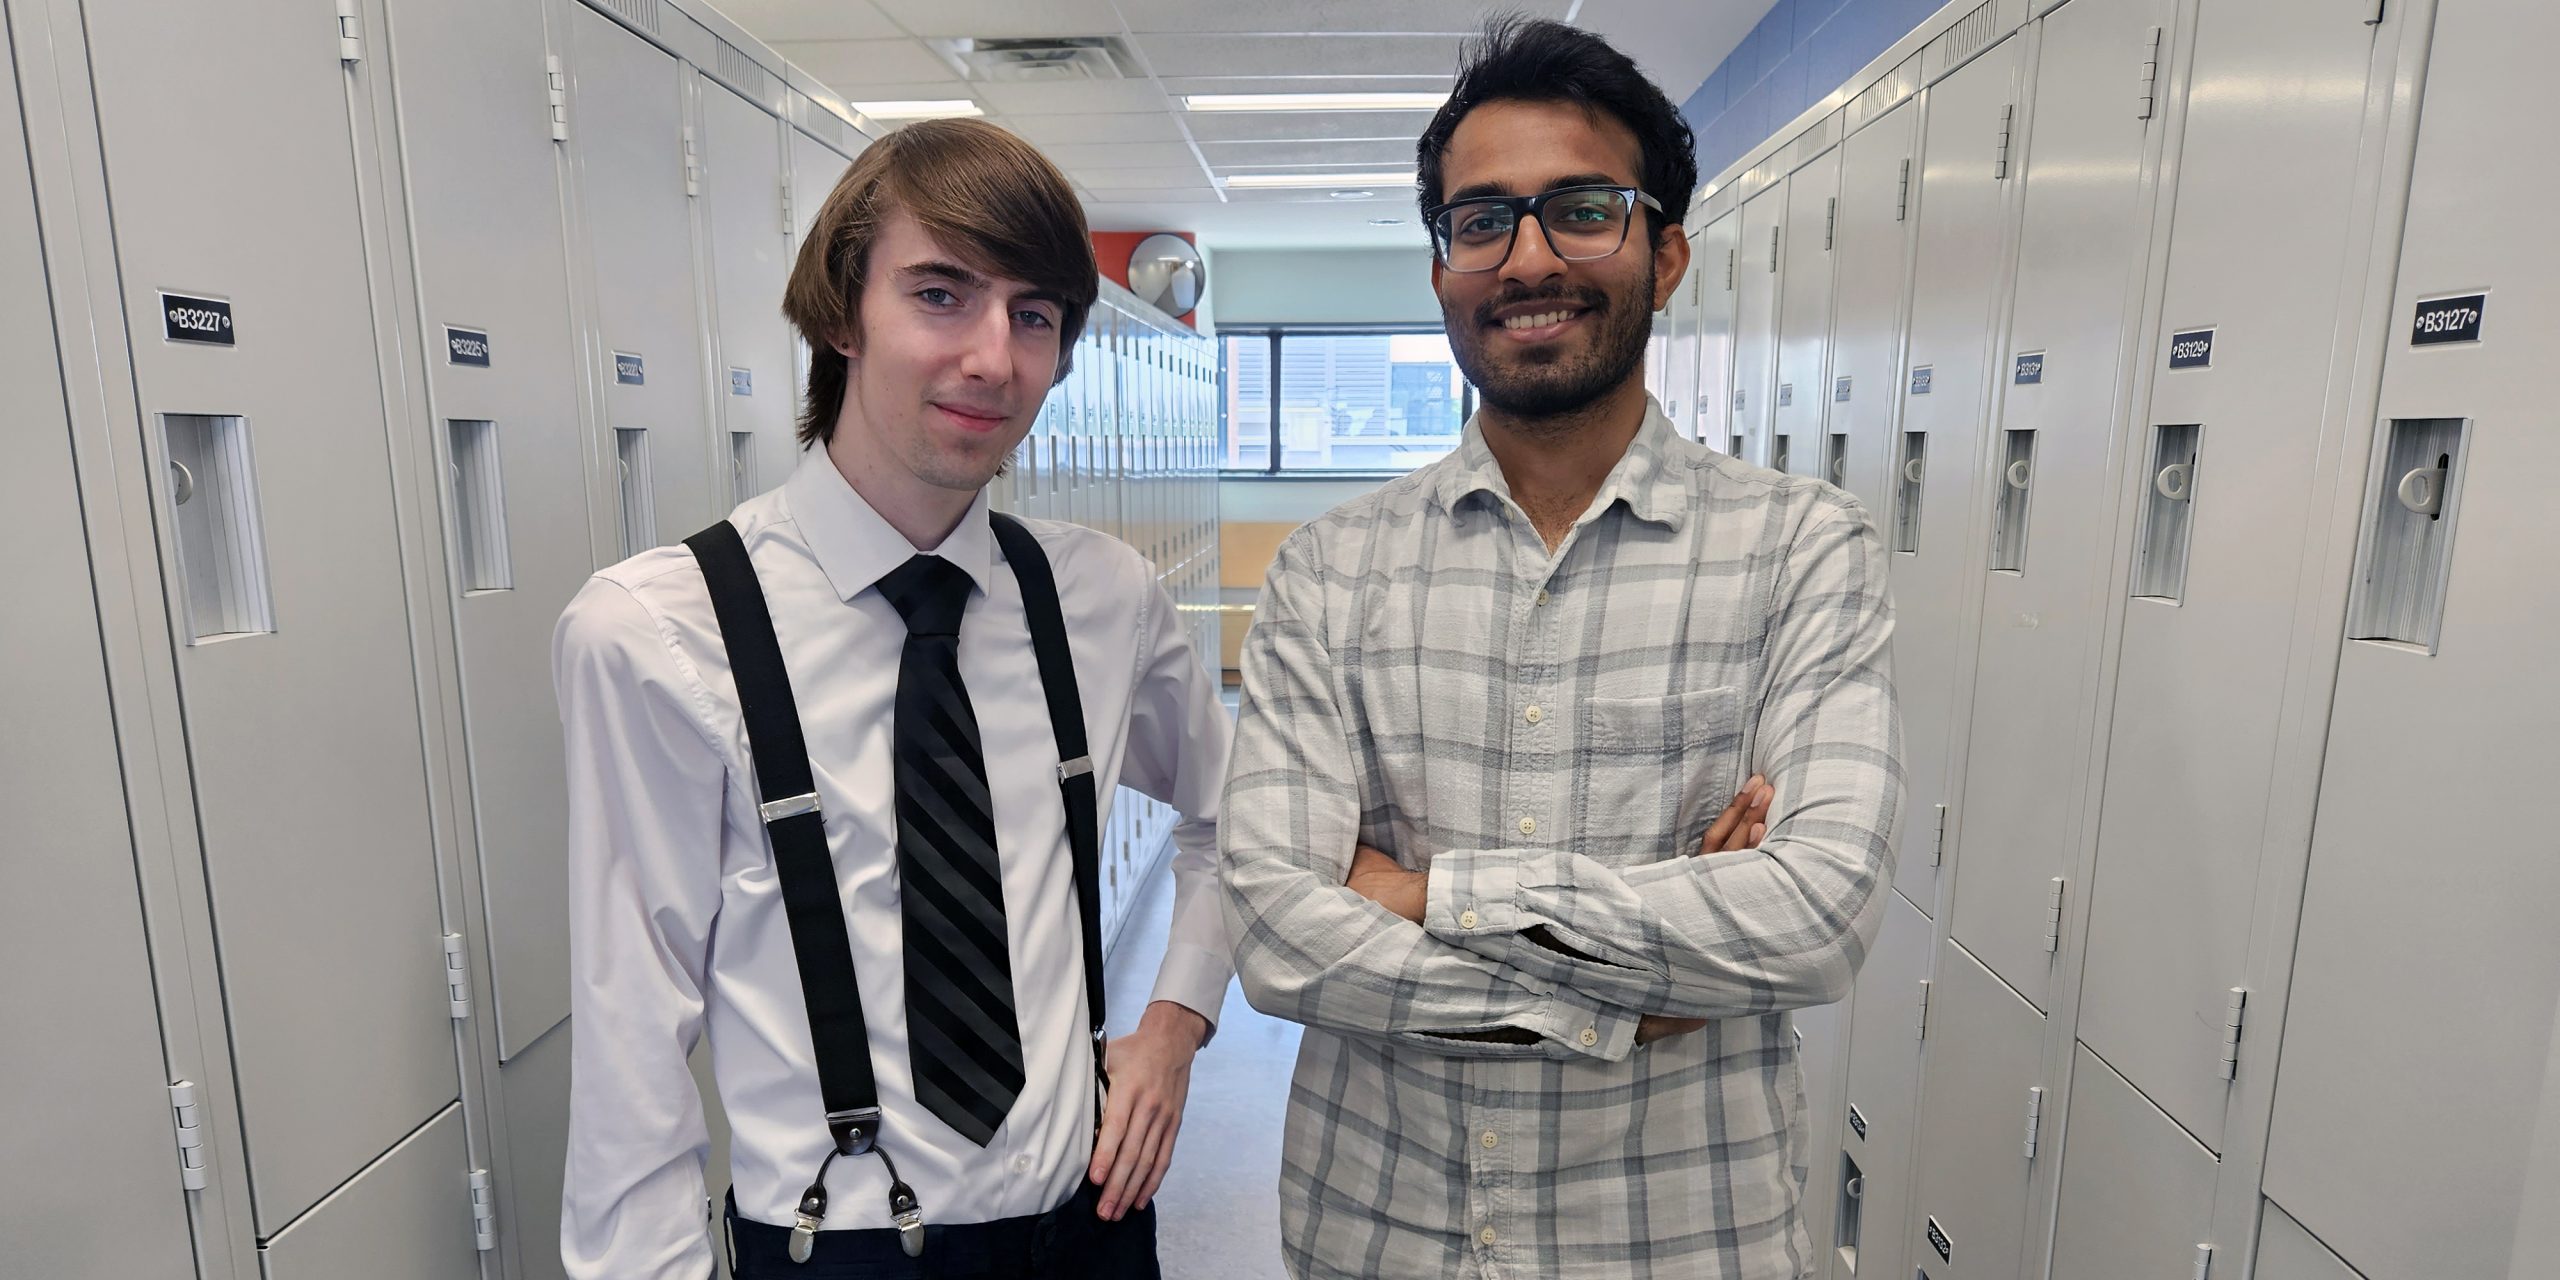 Branden Rushton and Bhavya Shah are pictured posing in front of lockers on campus at Durham College.